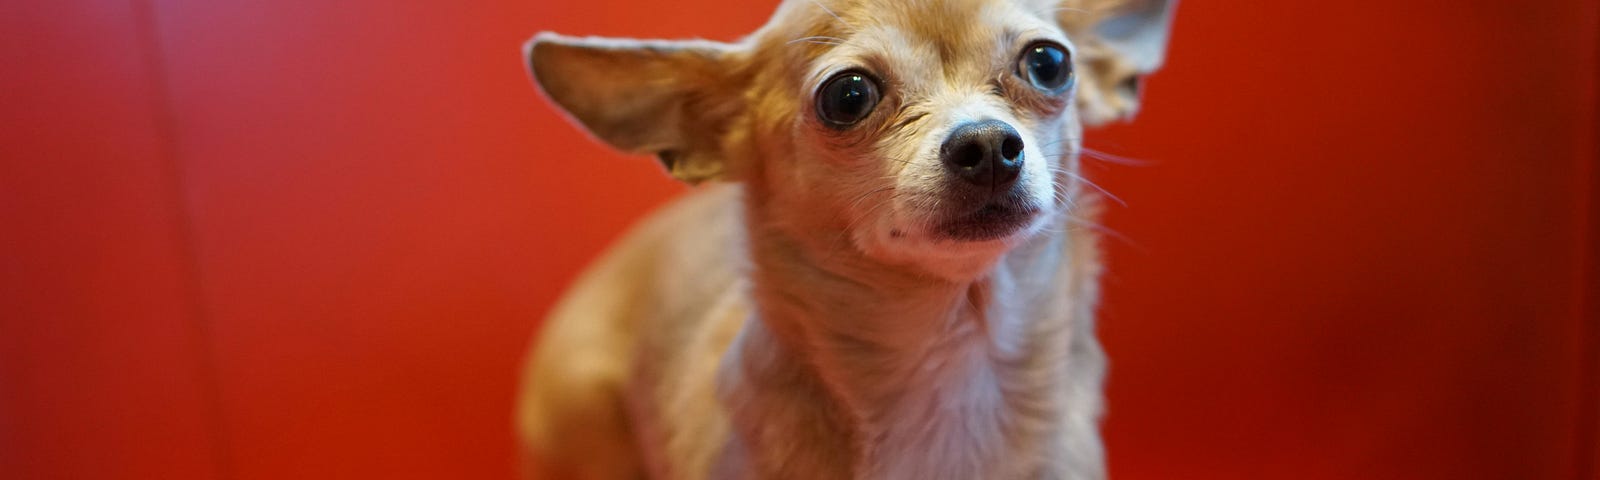 Photo showing a helpless looking Chihuahua dog gazing up at the camera on a reddish-orange background.